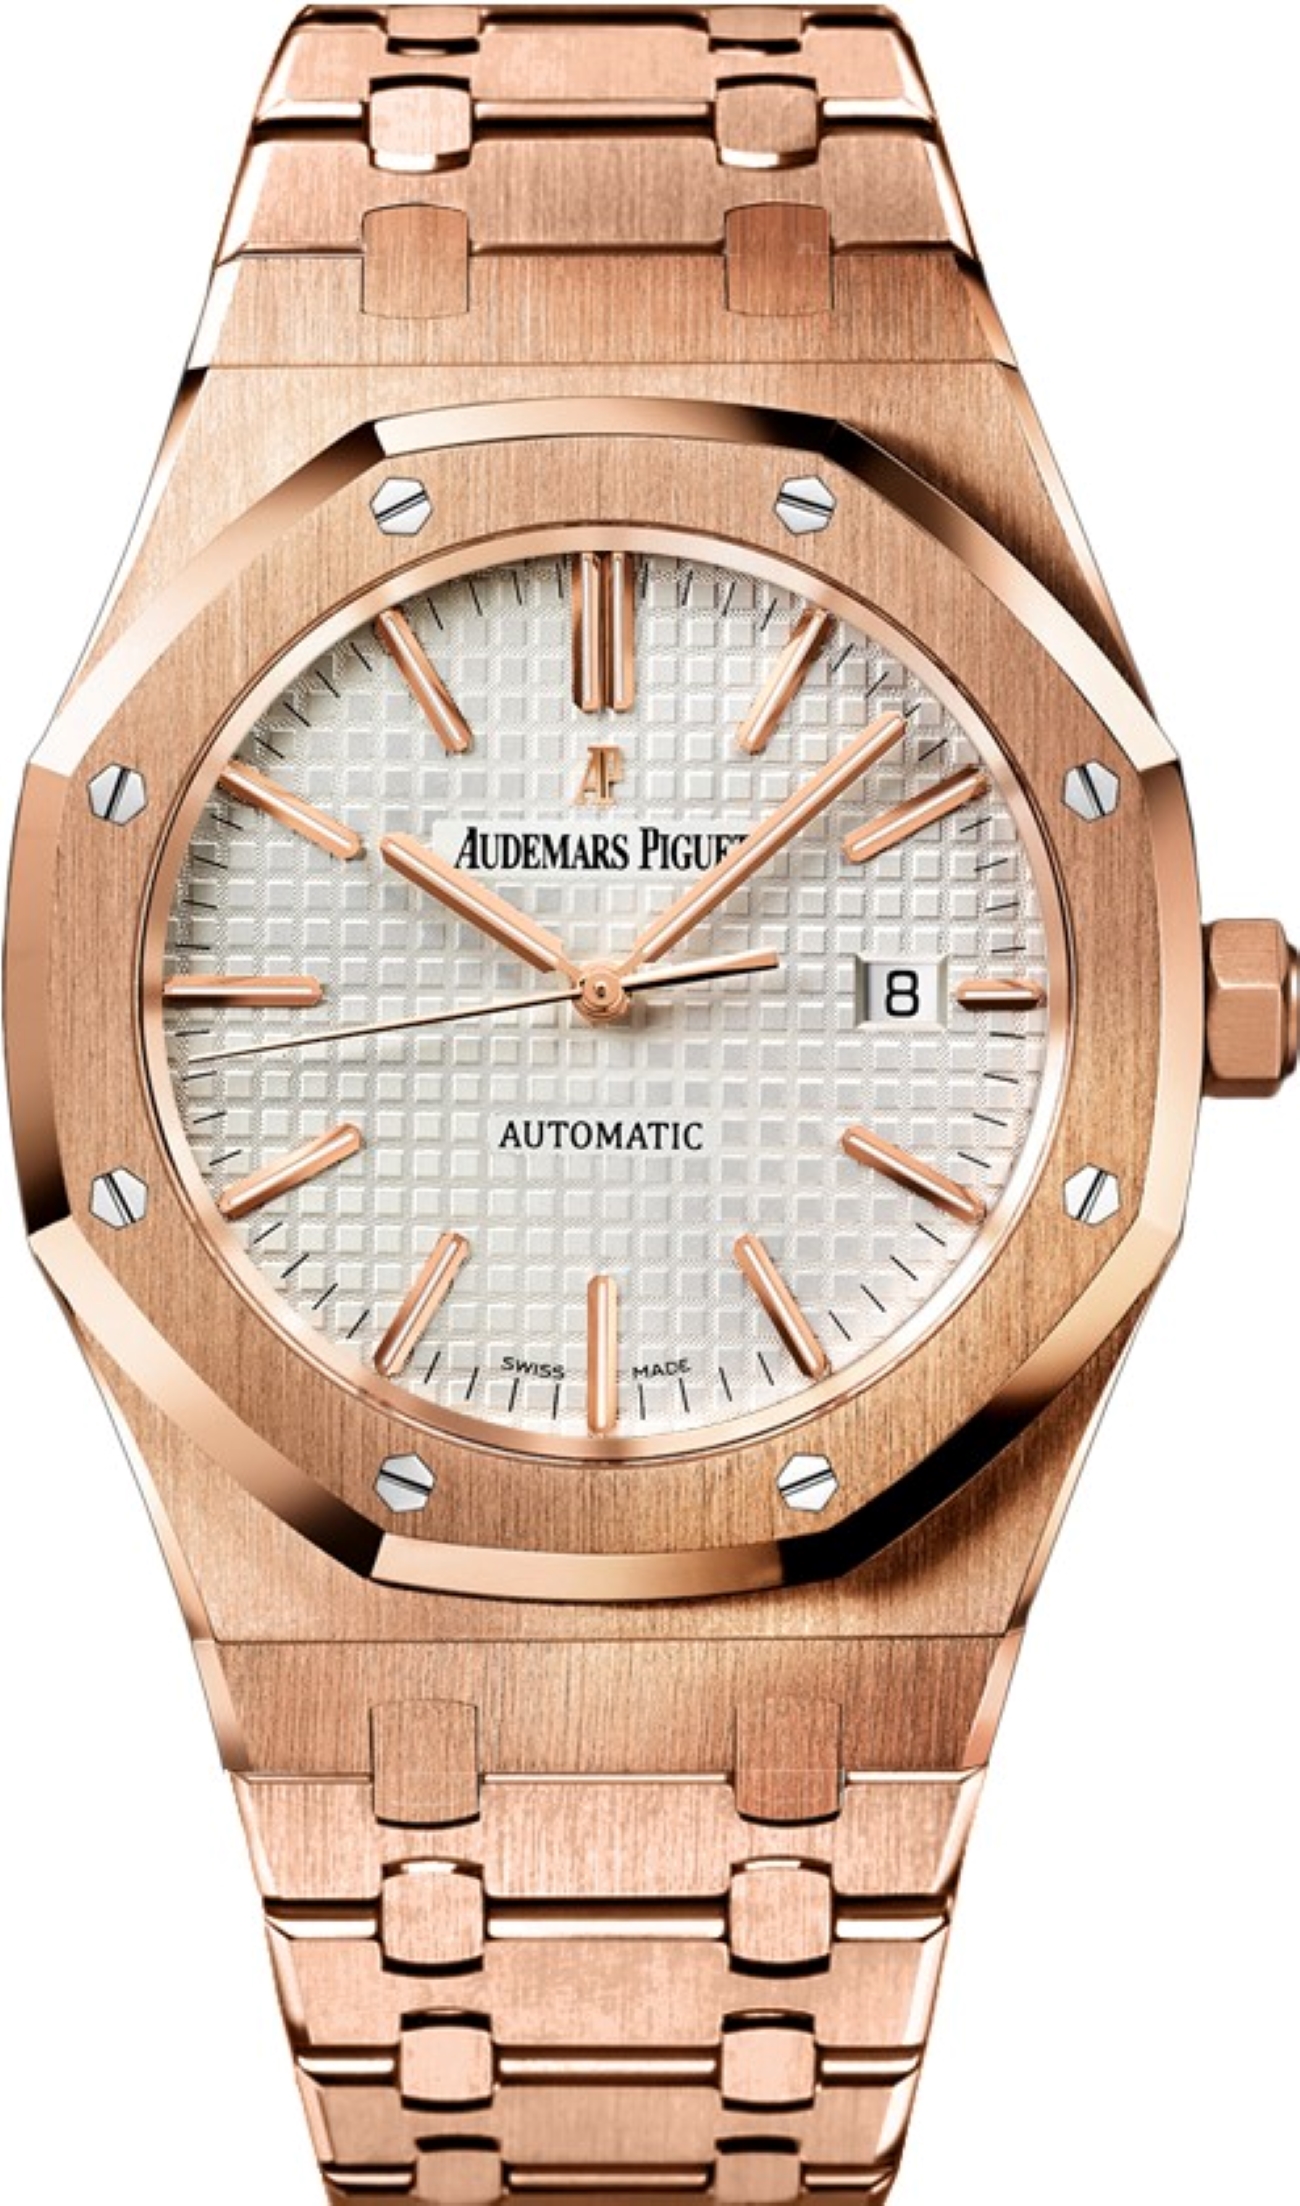 AUDEMARS PIGUET ROYAL OAK 41MM ROSE GOLD AUTOMATIC REF: 15400OR.OO.1220OR.02